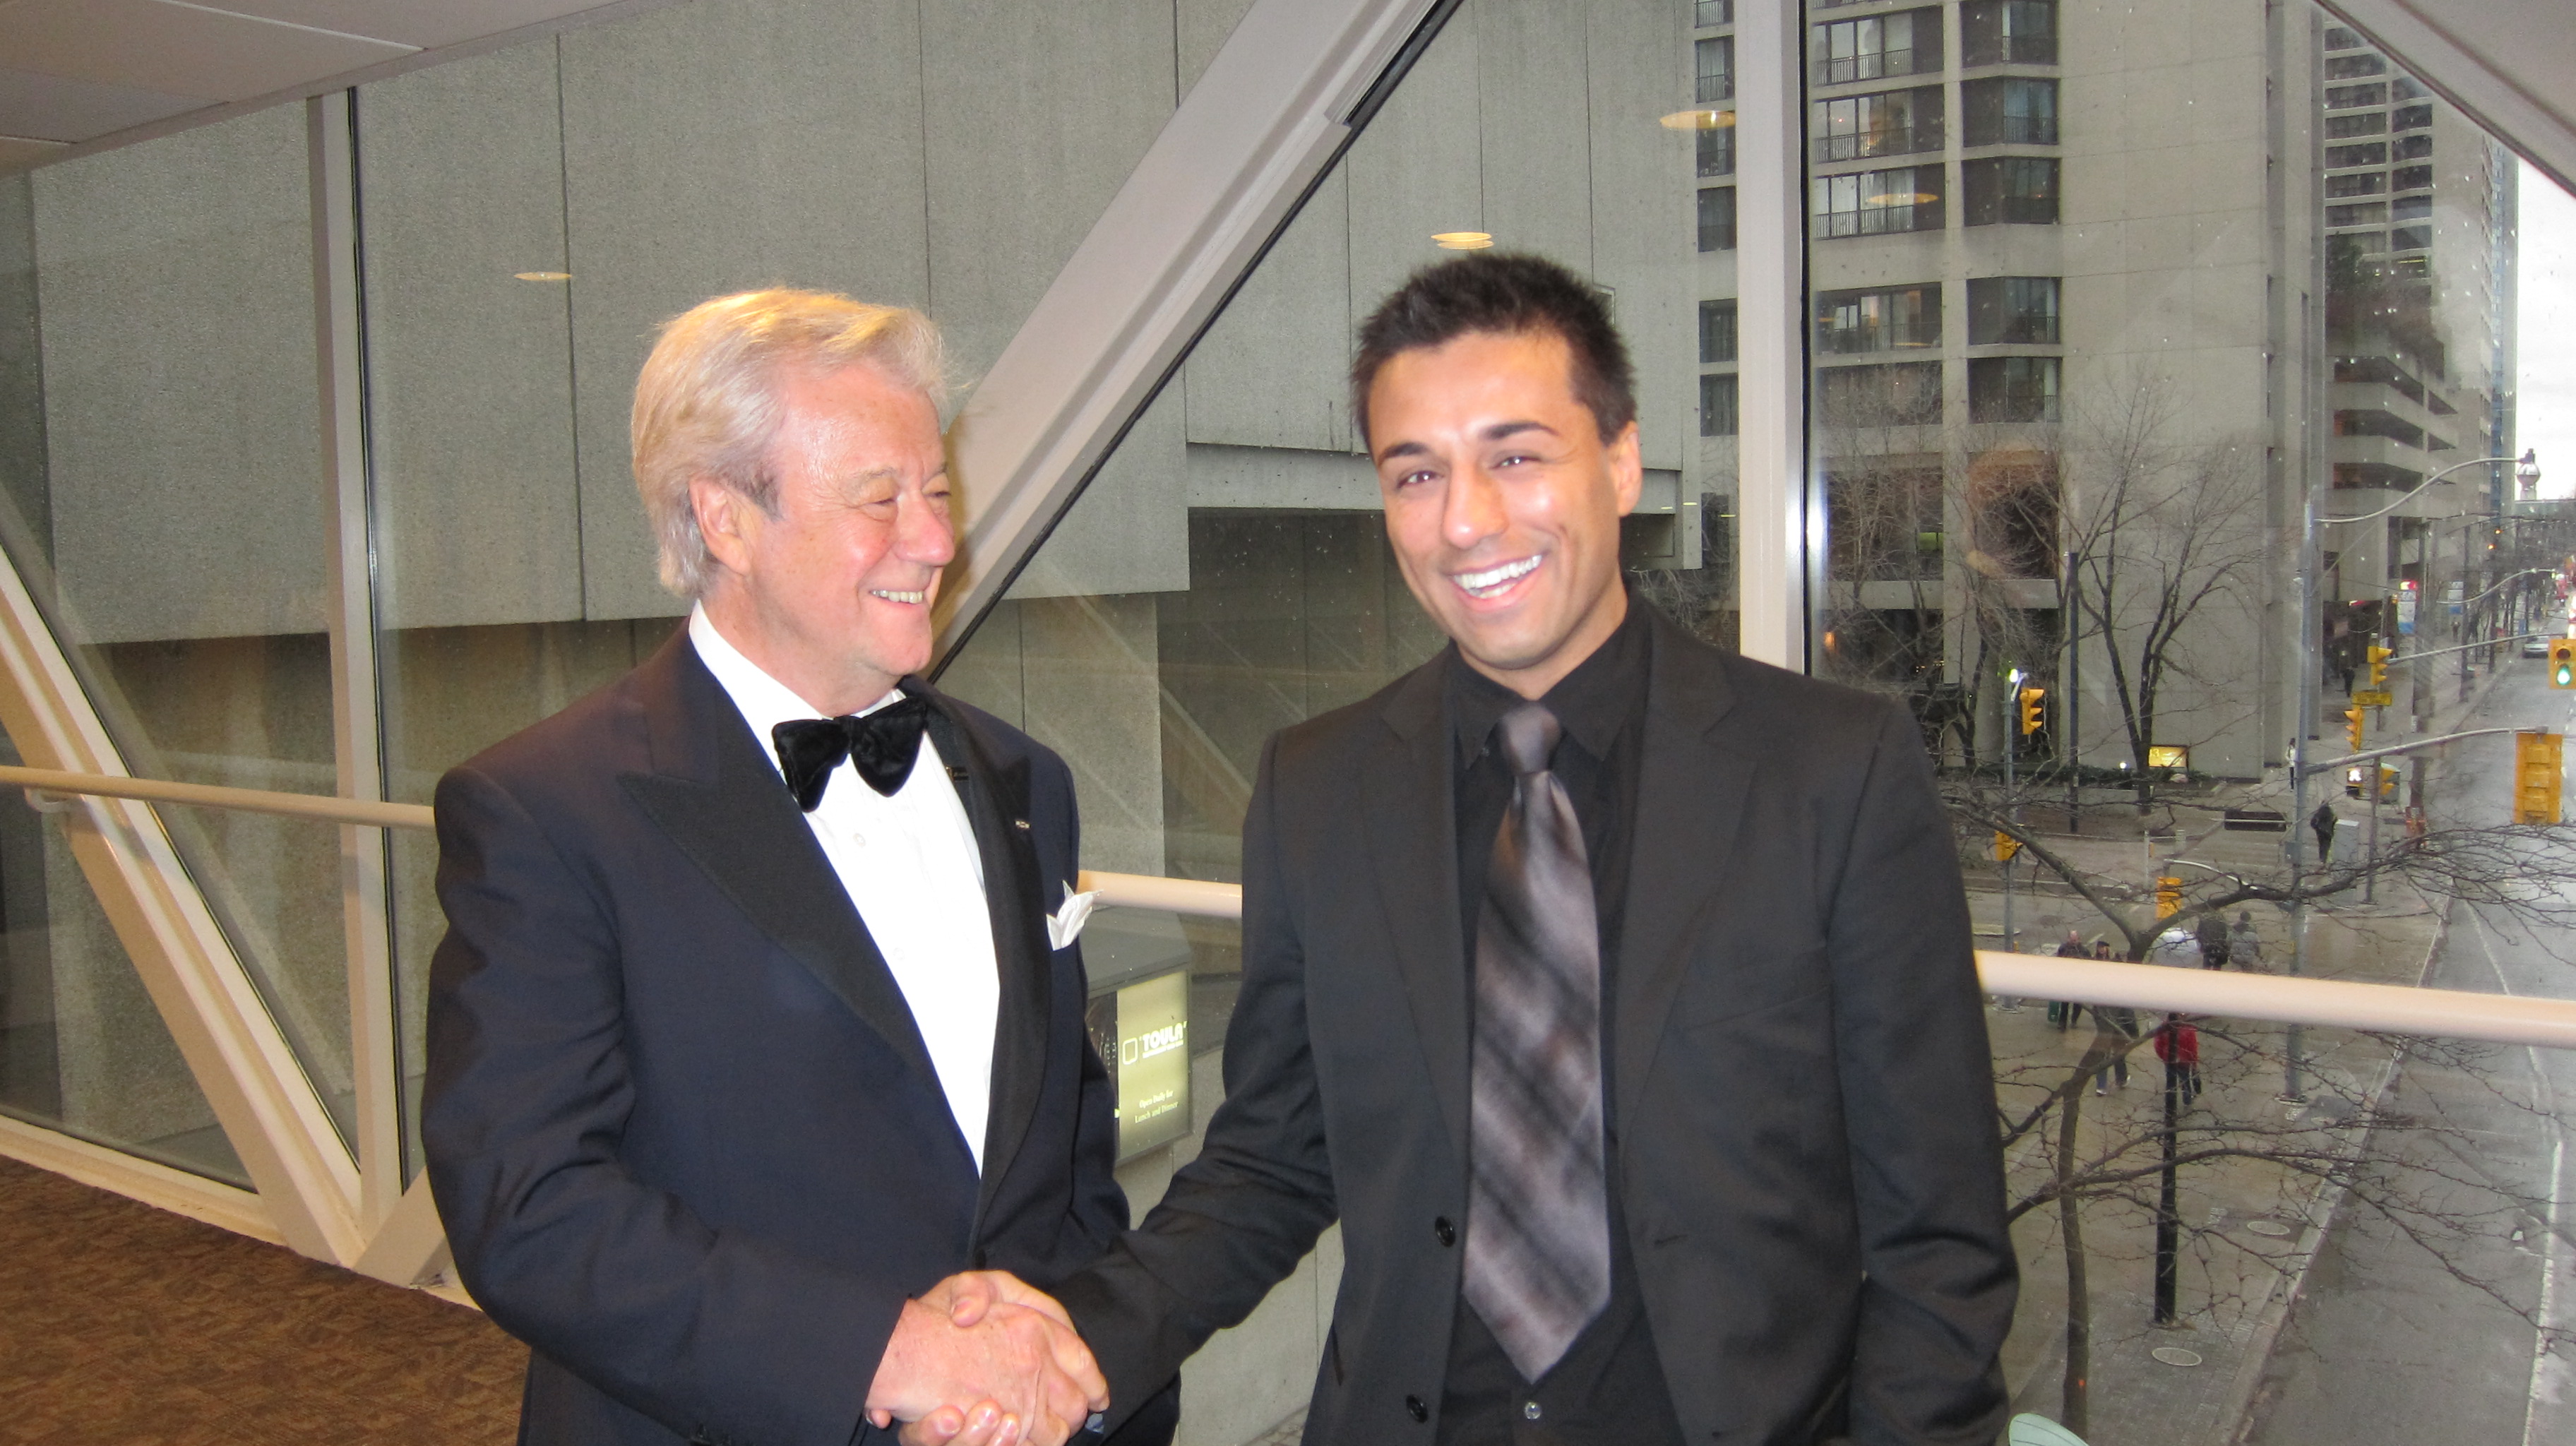 Gordon Pinsent - Won, Genie Best Performance by an Actor in a Leading Role for Away from Her (2006) with Mani Nasry at 32nd Genie Awards 2012